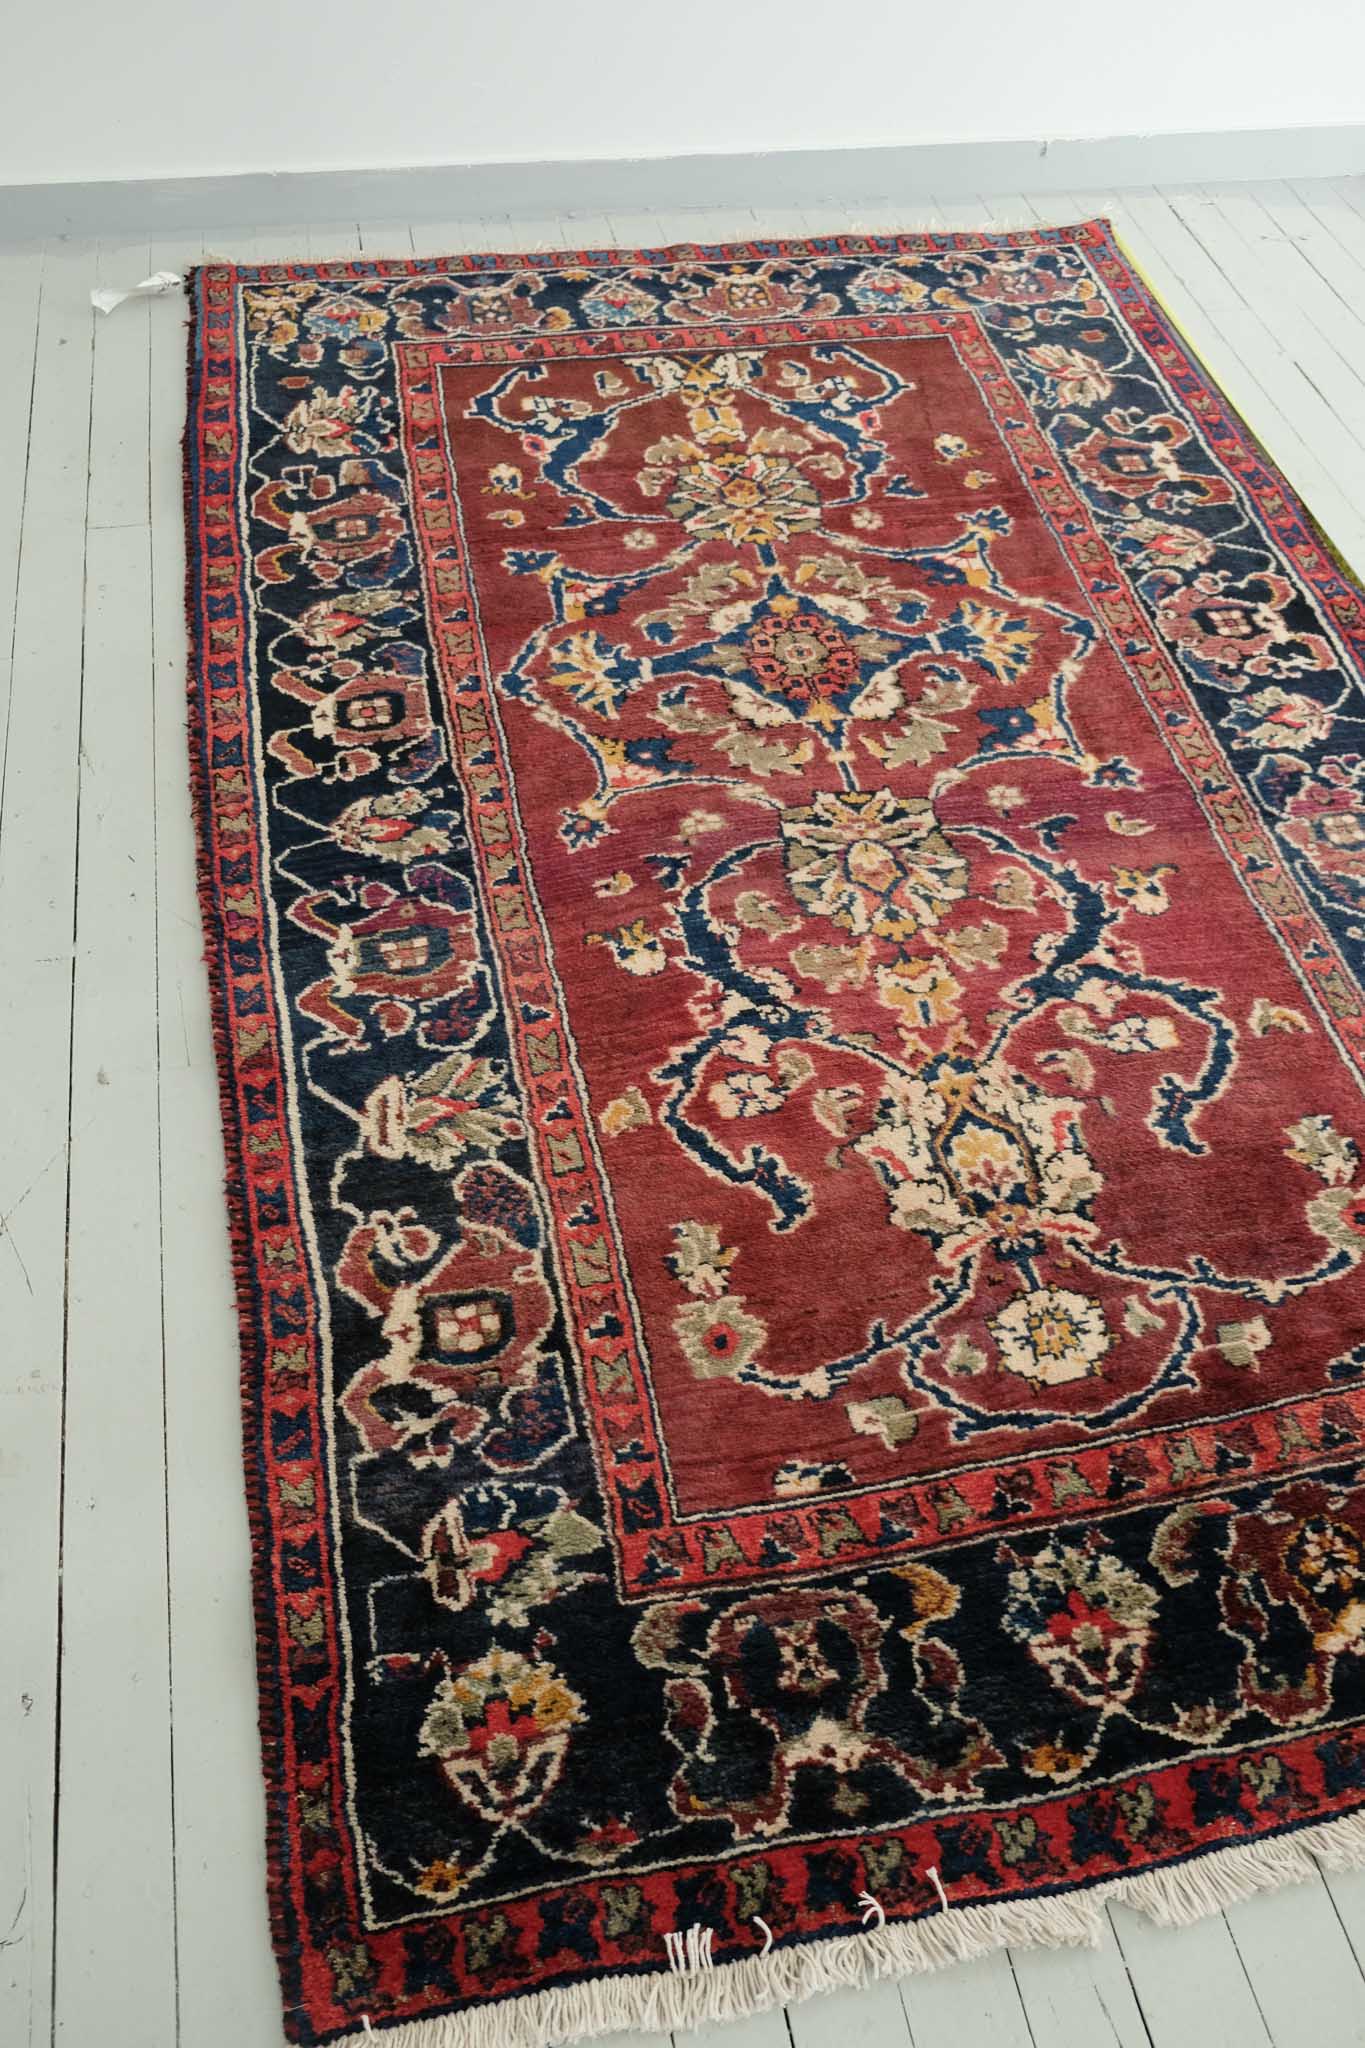 Knotted Wool Persian Area Rug 5'3" x 8'6"